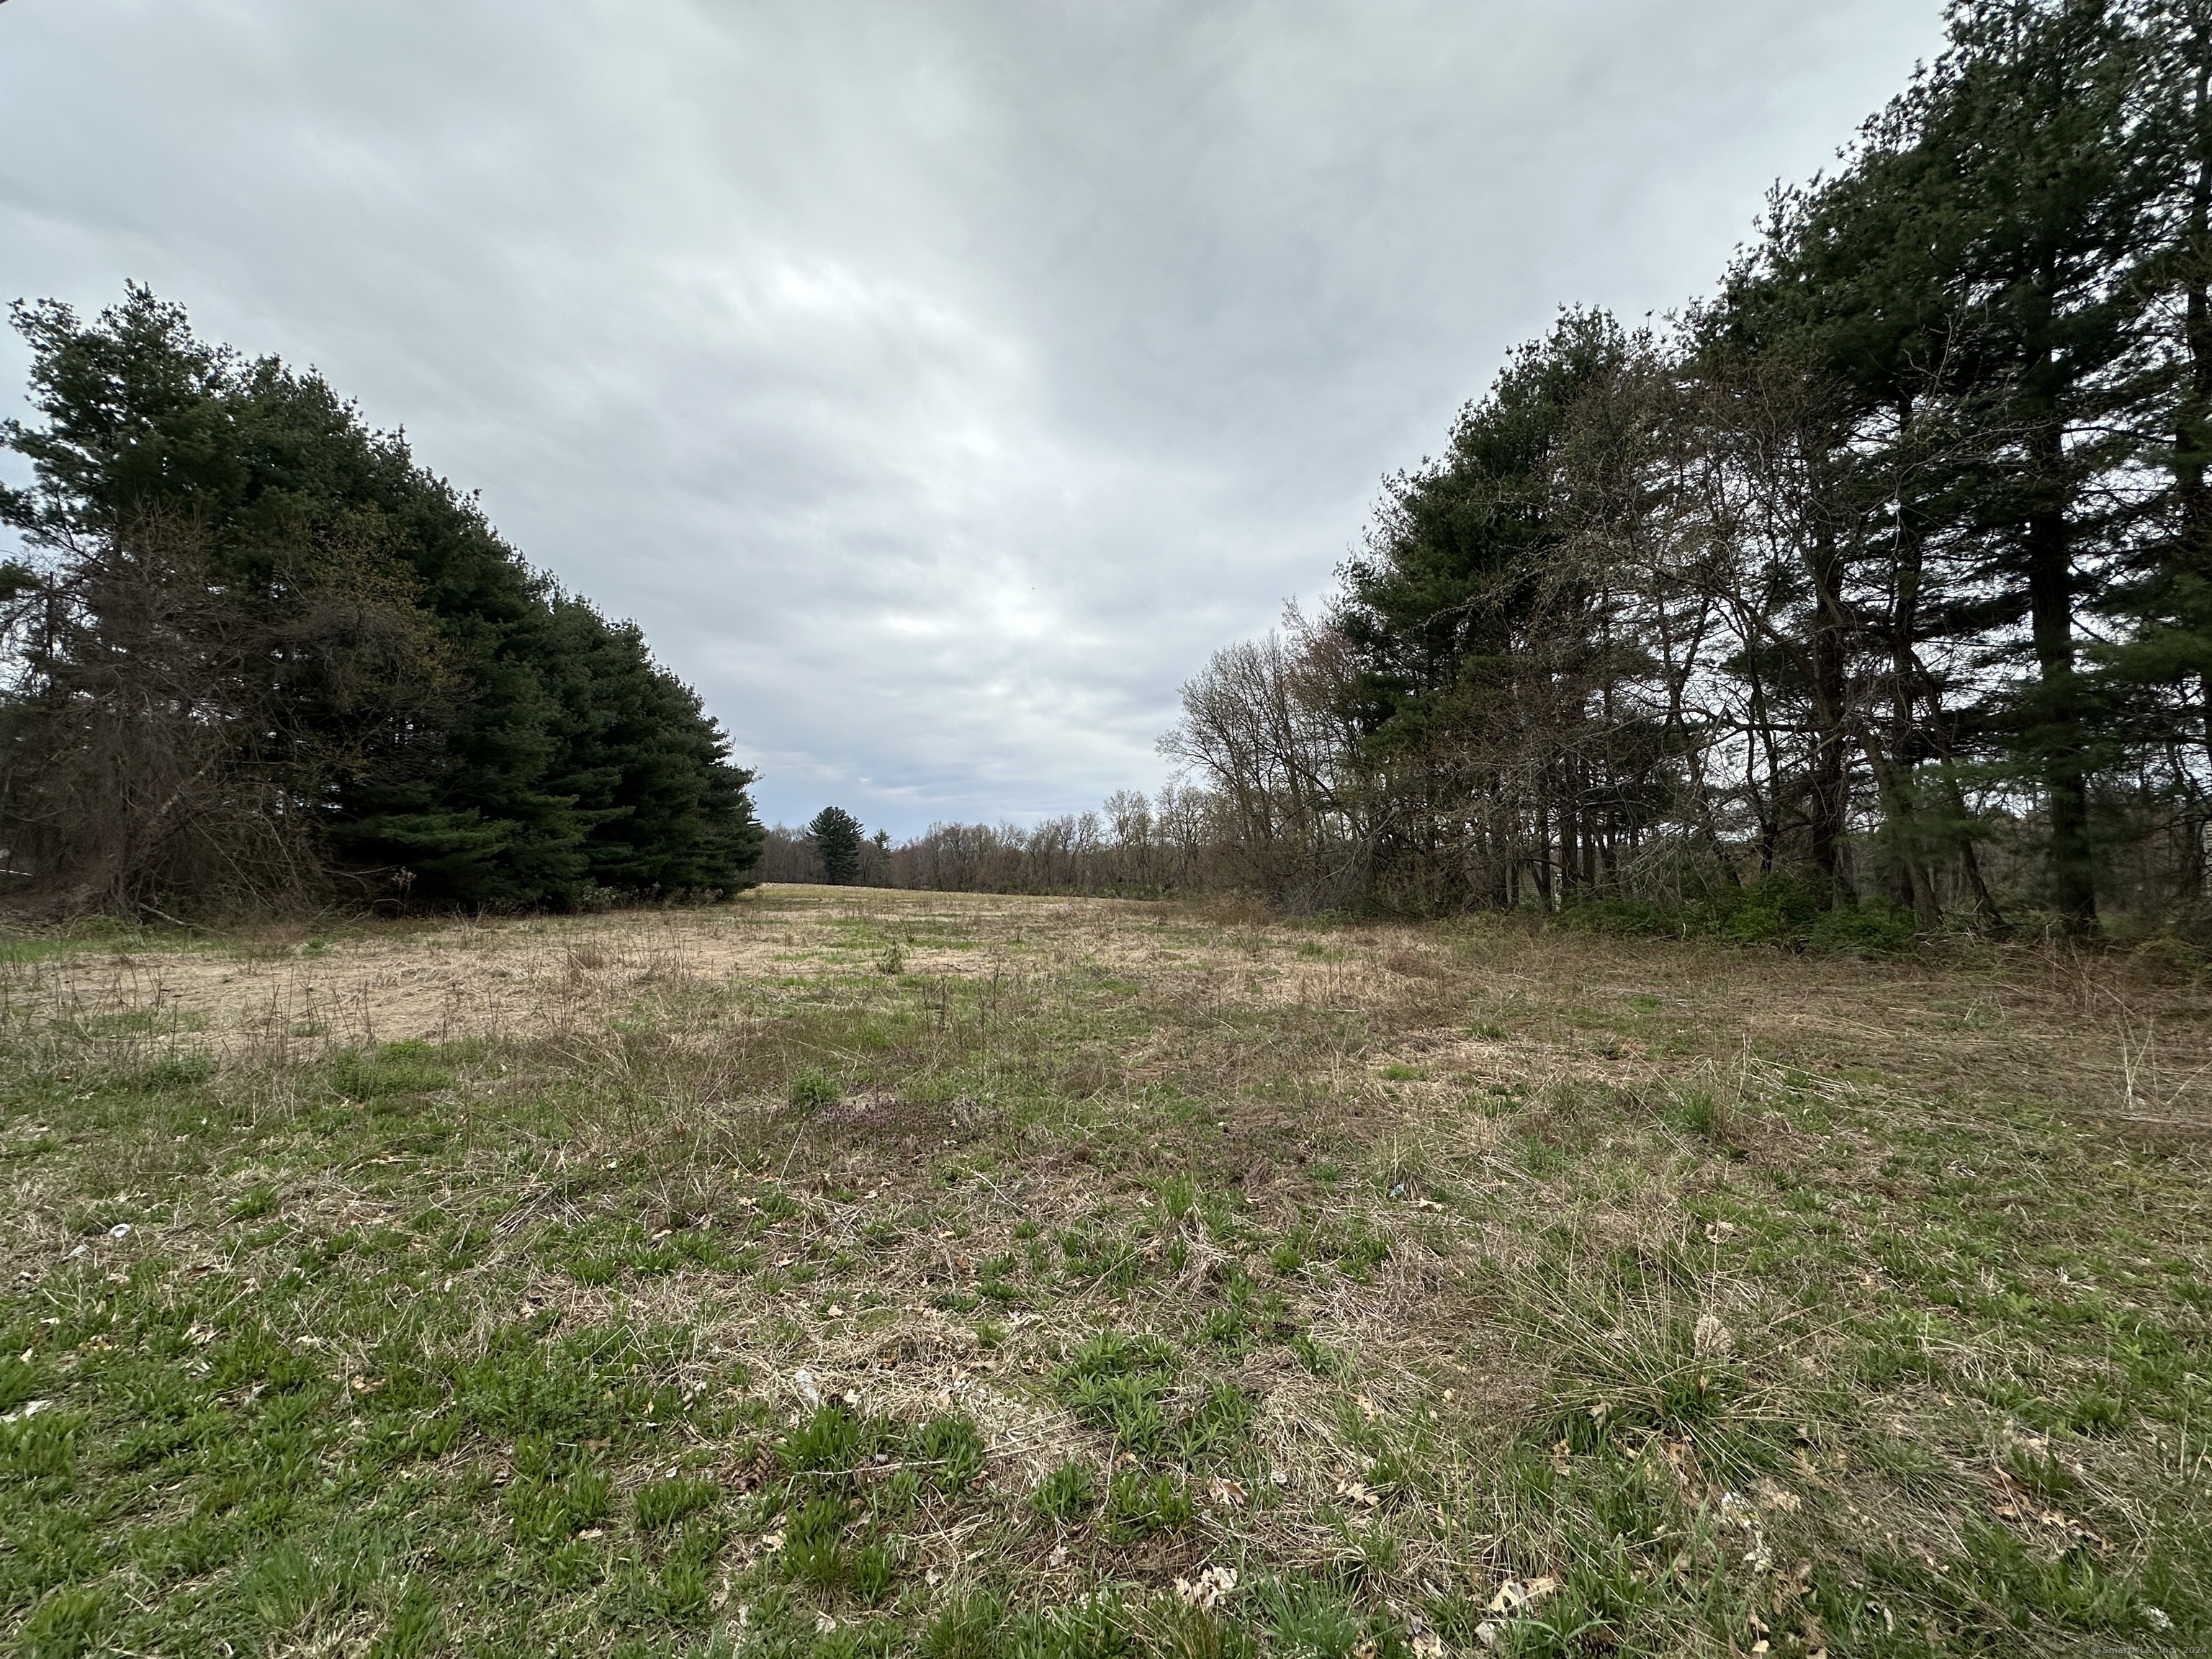 Level and Cleared lot. Public water available. Septic required. Location and plan is approved. Area of fine homes in Southern Somers.